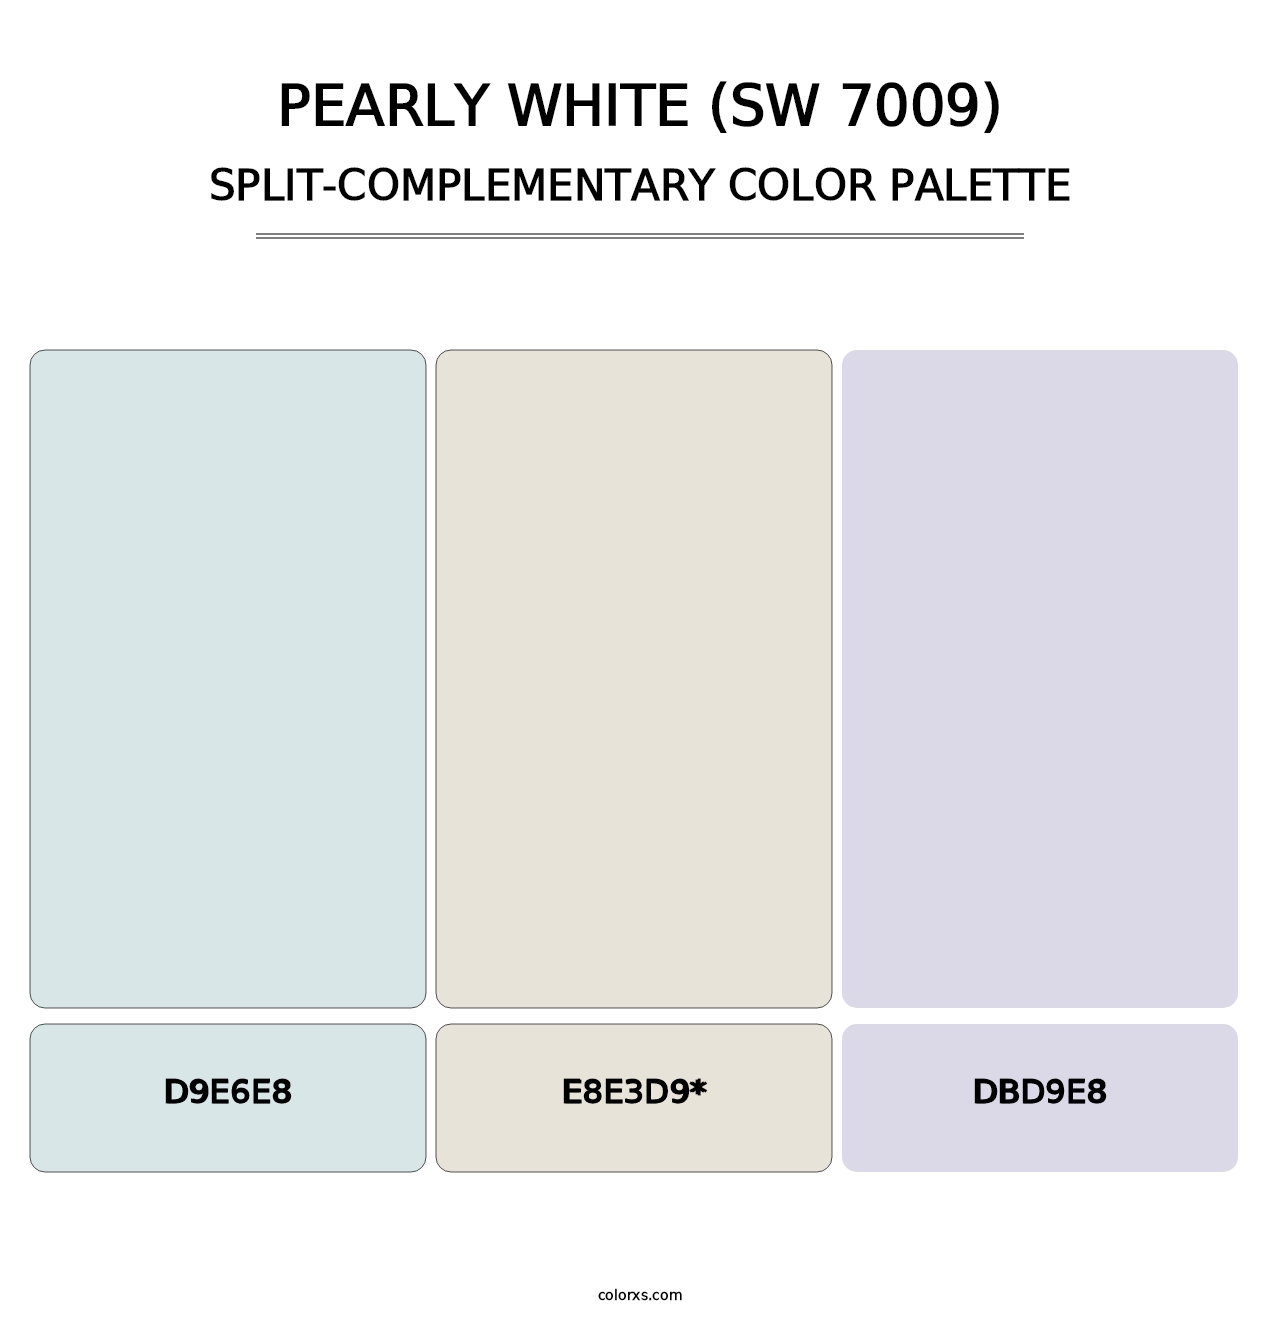 Pearly White (SW 7009) - Split-Complementary Color Palette